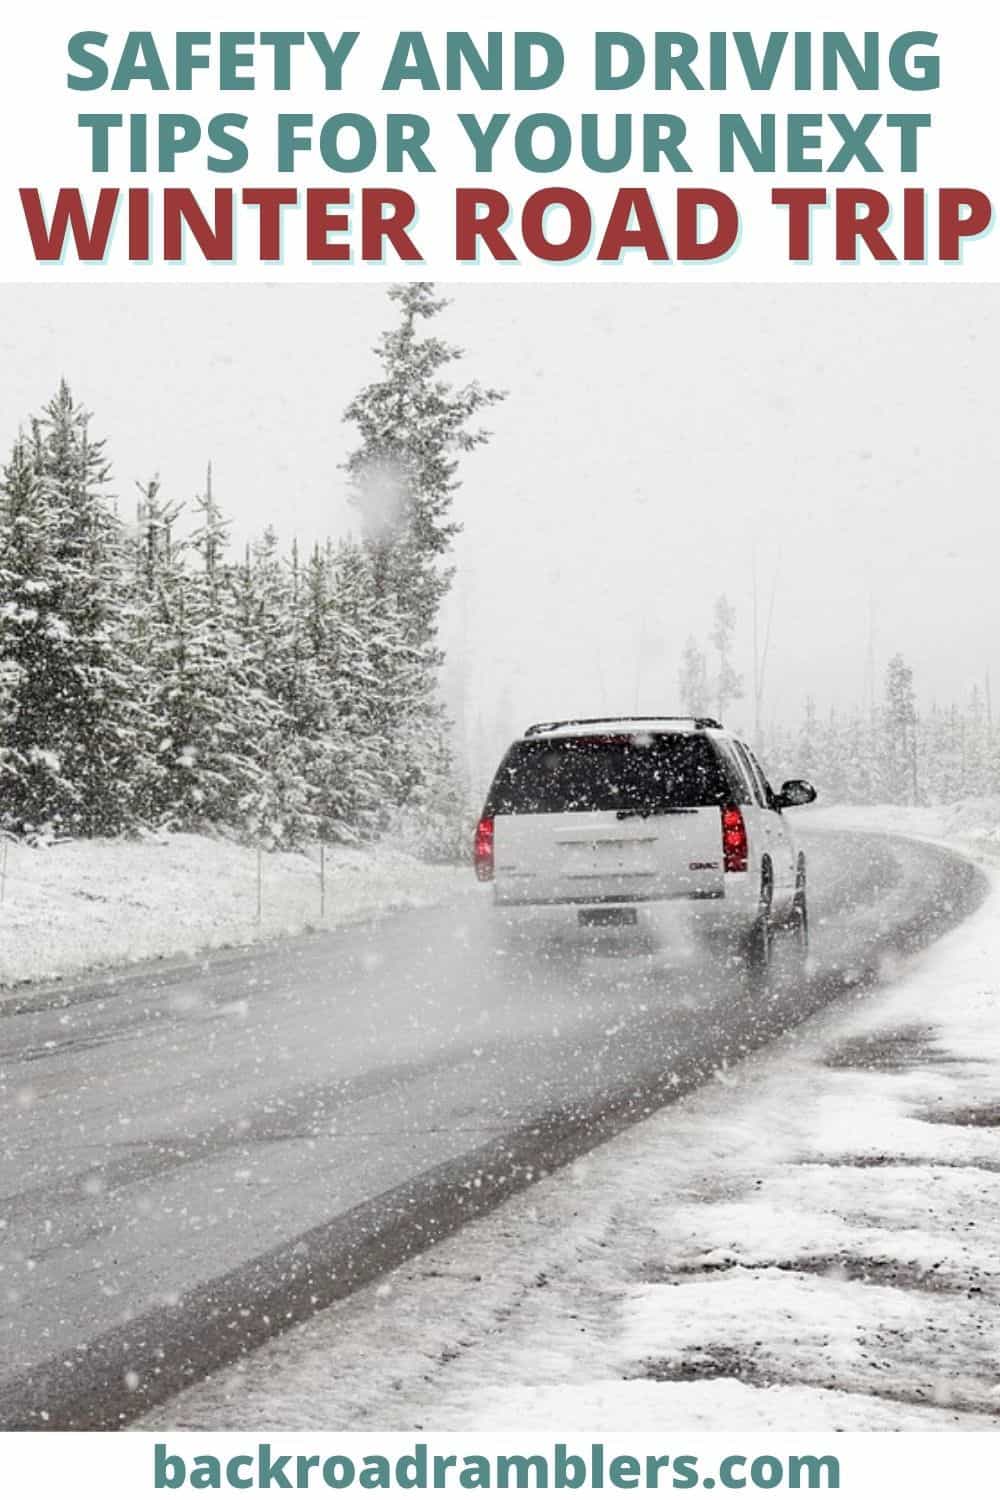 A car driving on a snowy road. Text overlay: Safety and Driving Tips for Your Next Winter Road Trip.